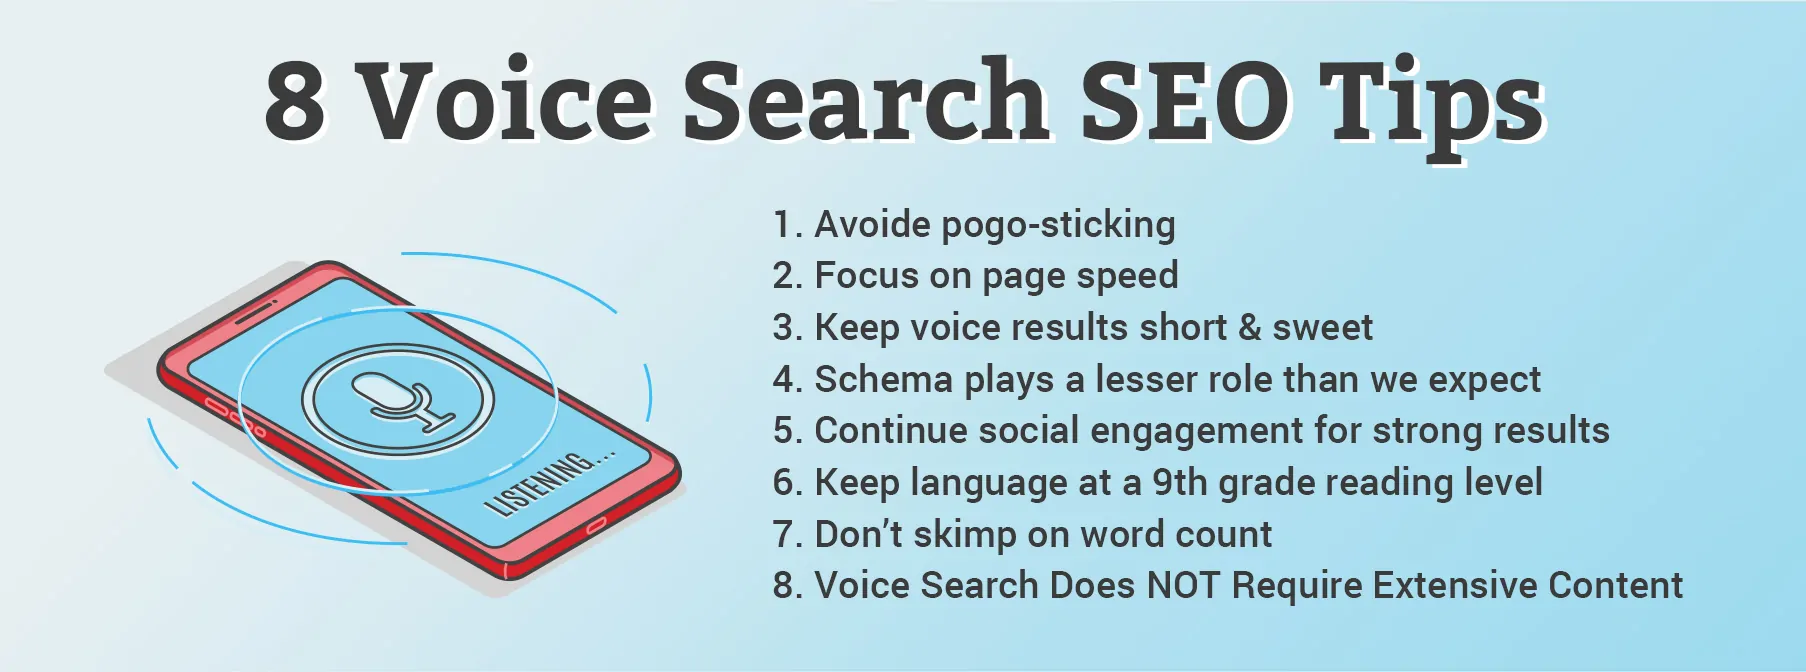 voice search seo tips